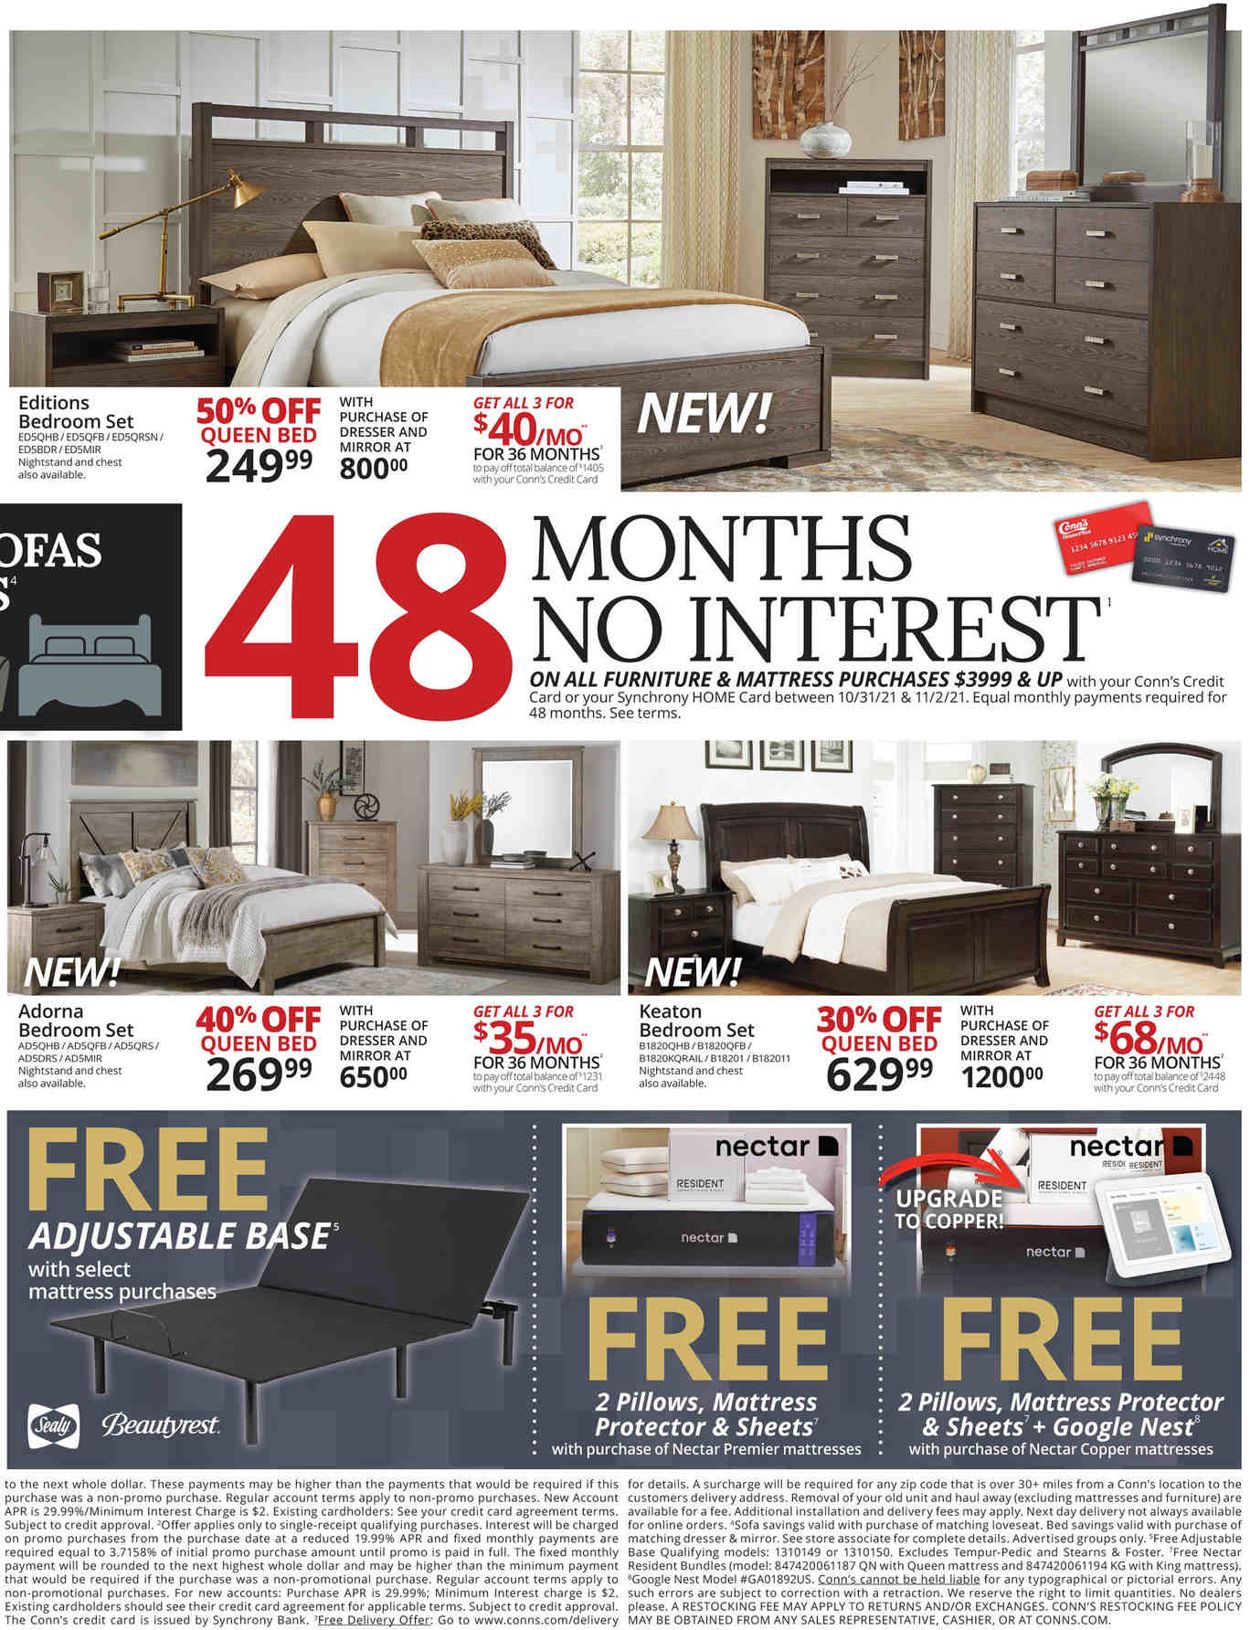 Conn's Home Plus BLACK FRIDAY 2021 Weekly Ad Circular - valid 10/31-11/02/2021 (Page 3)